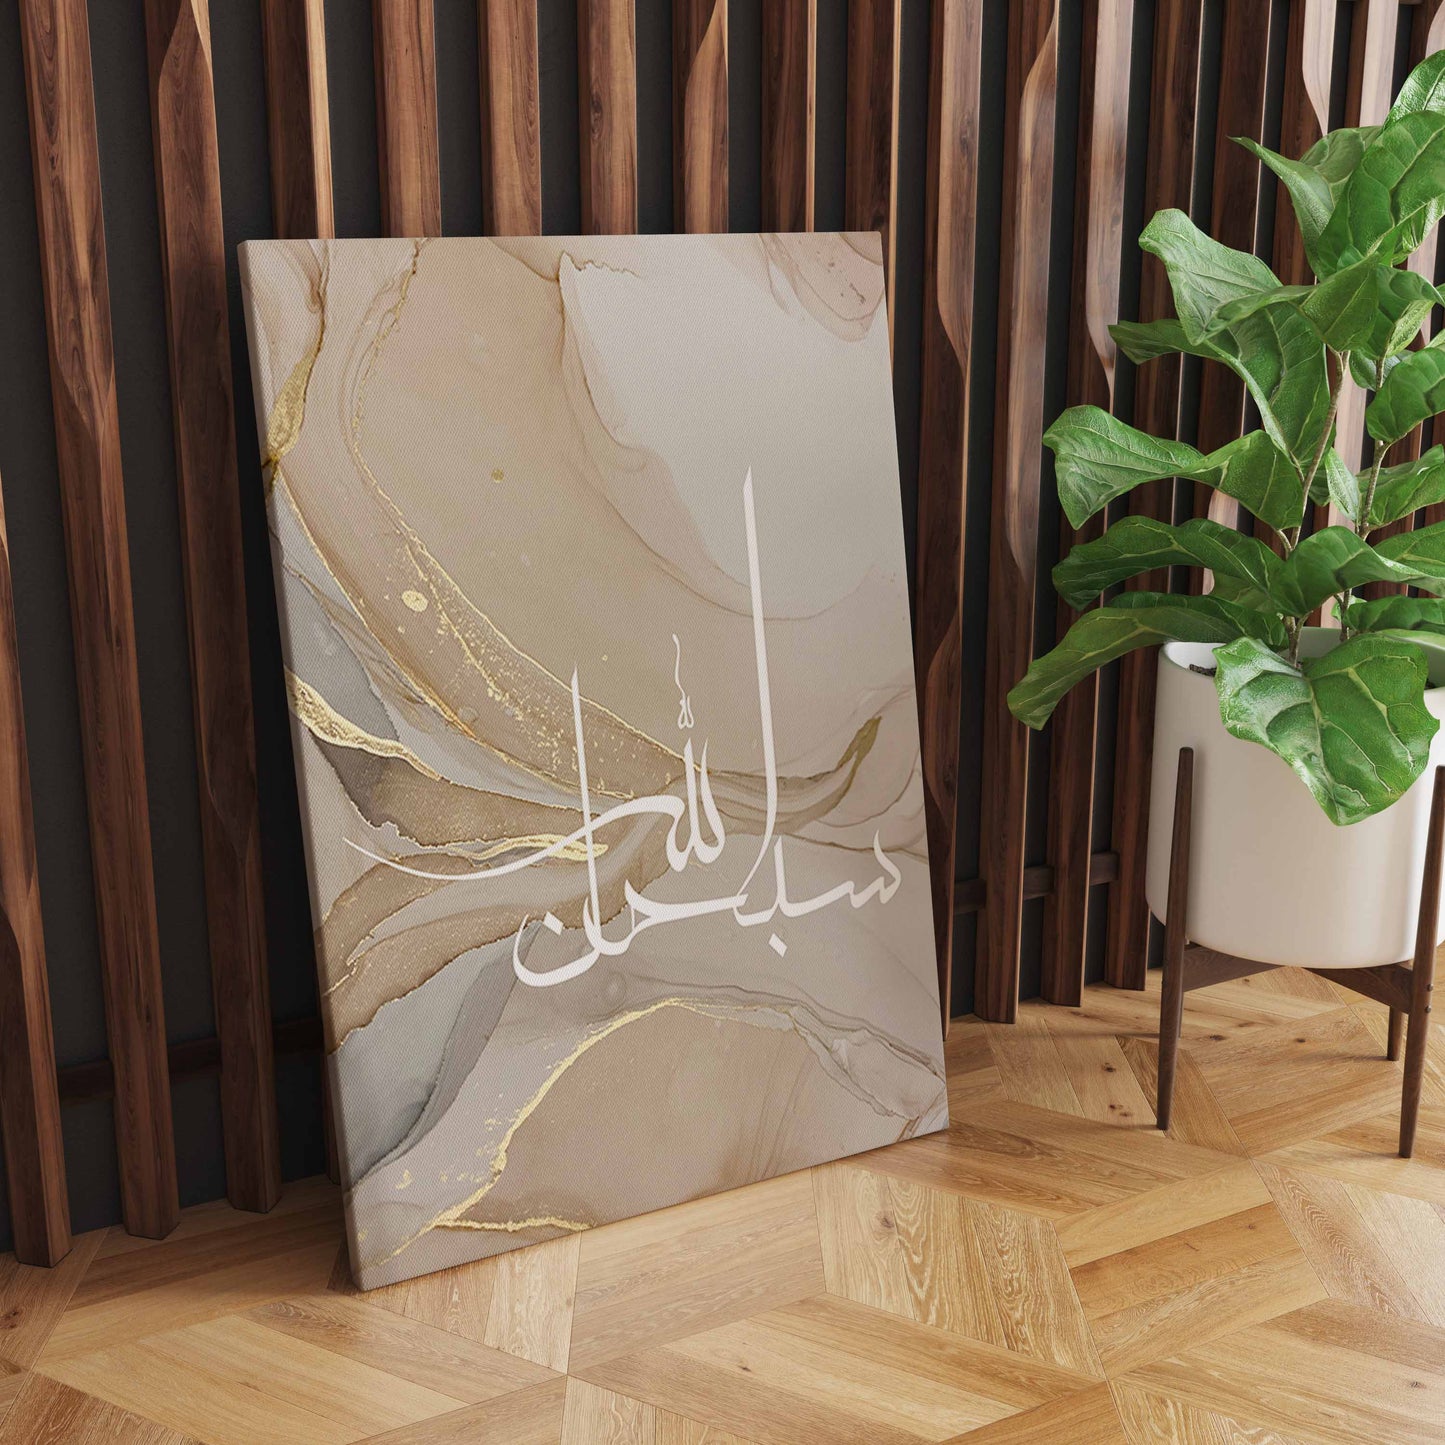 Islamic Calligraphy Allahu Akbar Beige Gold Marble Fluid Abstract Fabric Printed Wall Art - Transform Your Living Room Decor S04E25